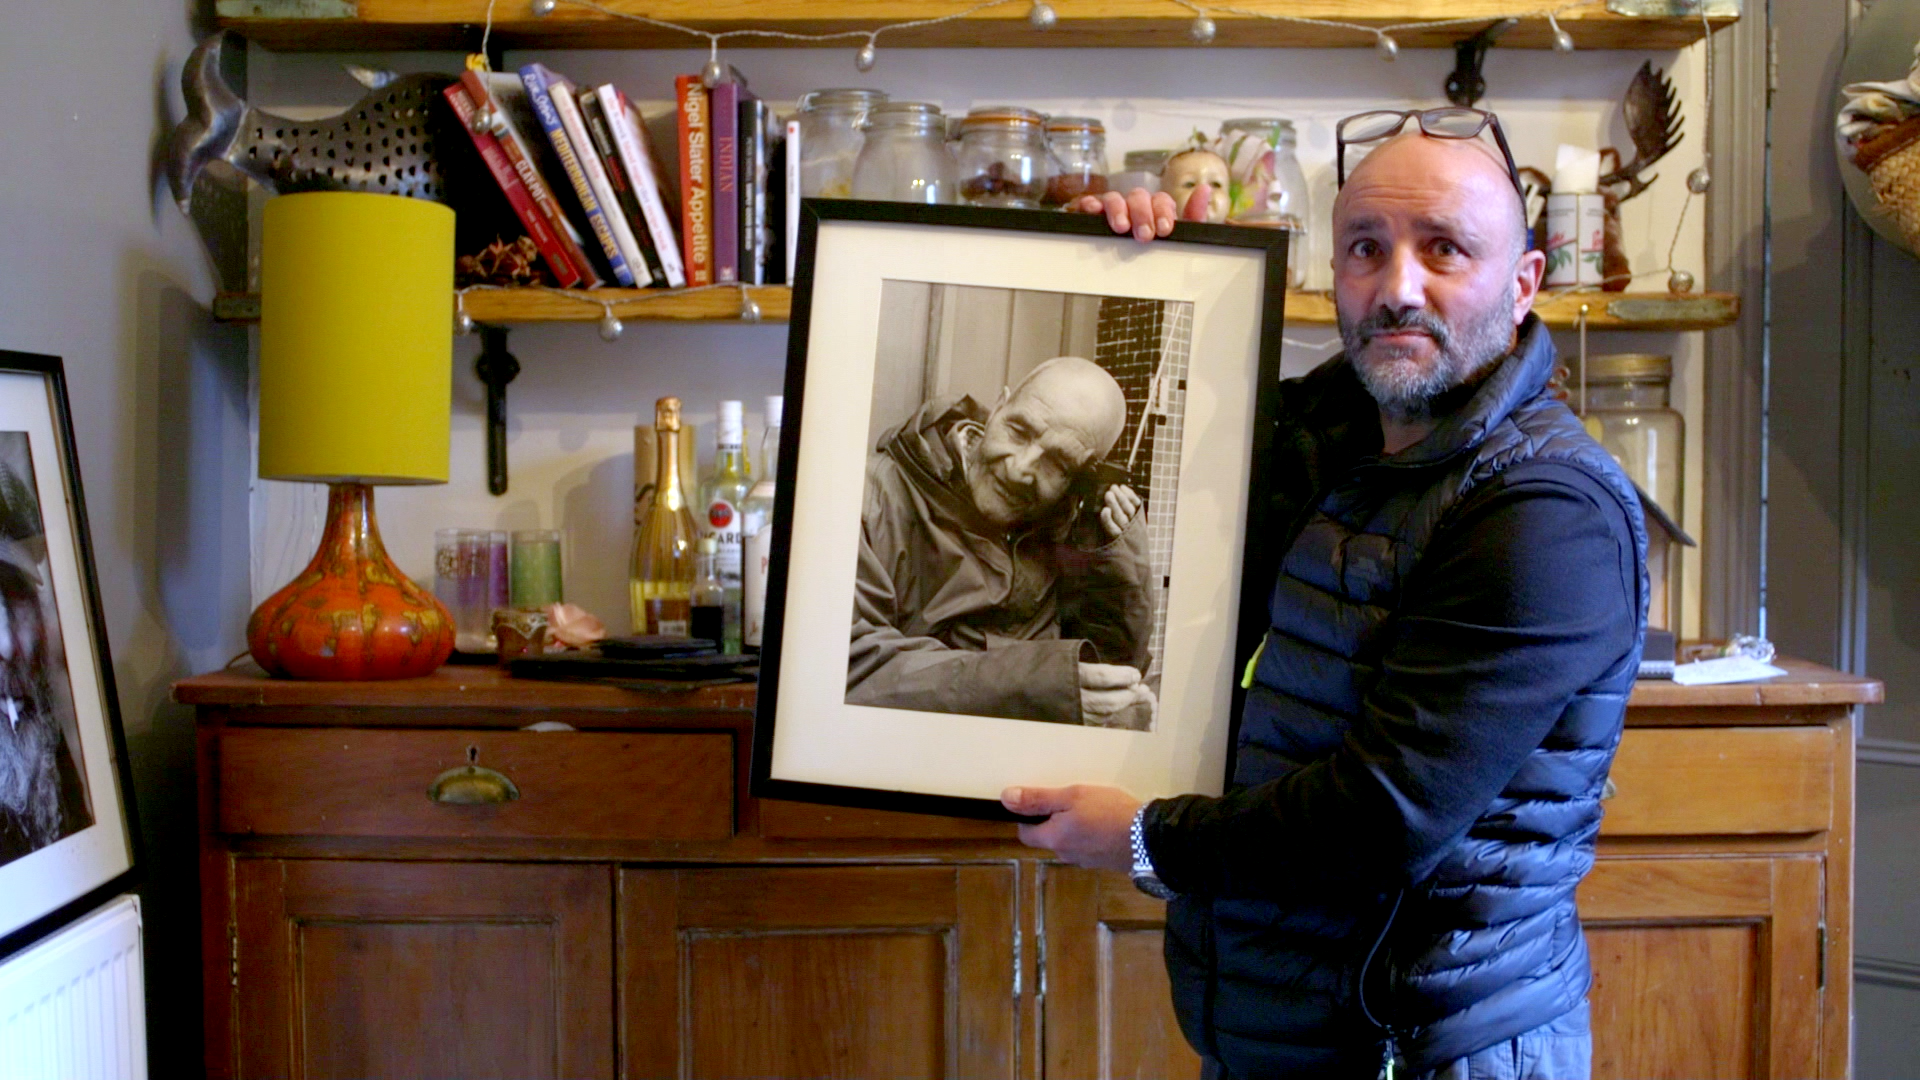 Image of a man holding a framed picture of an older man.